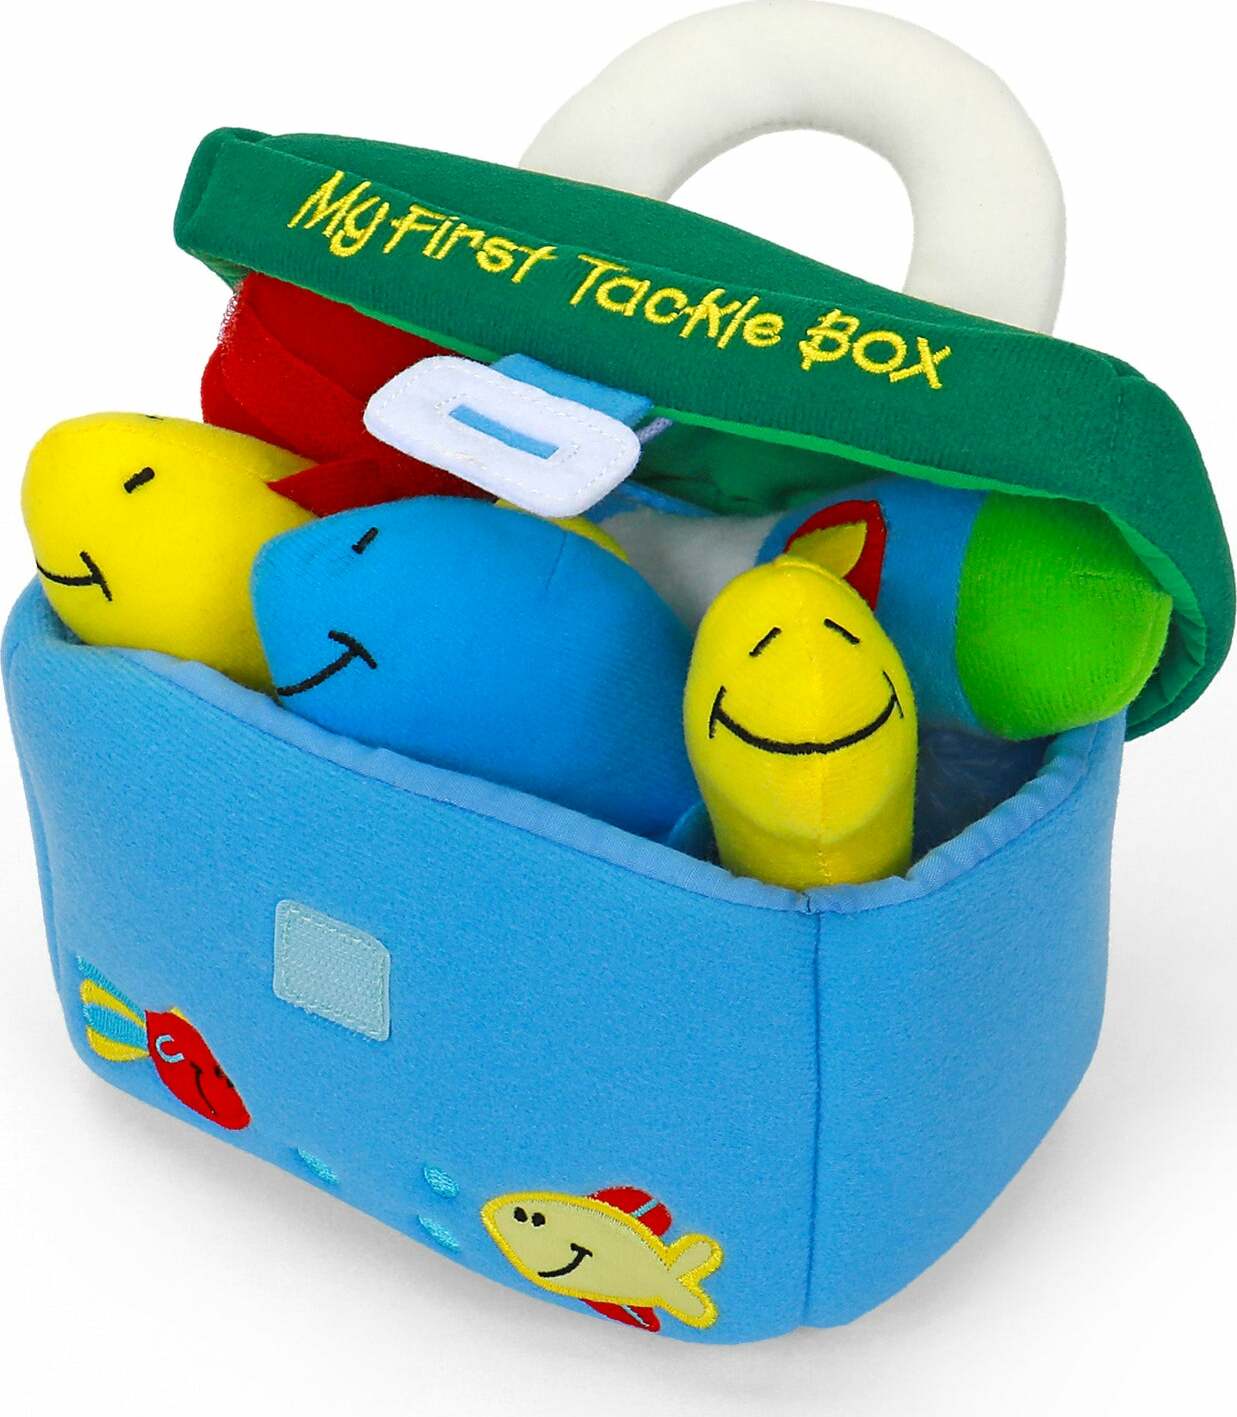 My First Tackle Box Playset, 8 In